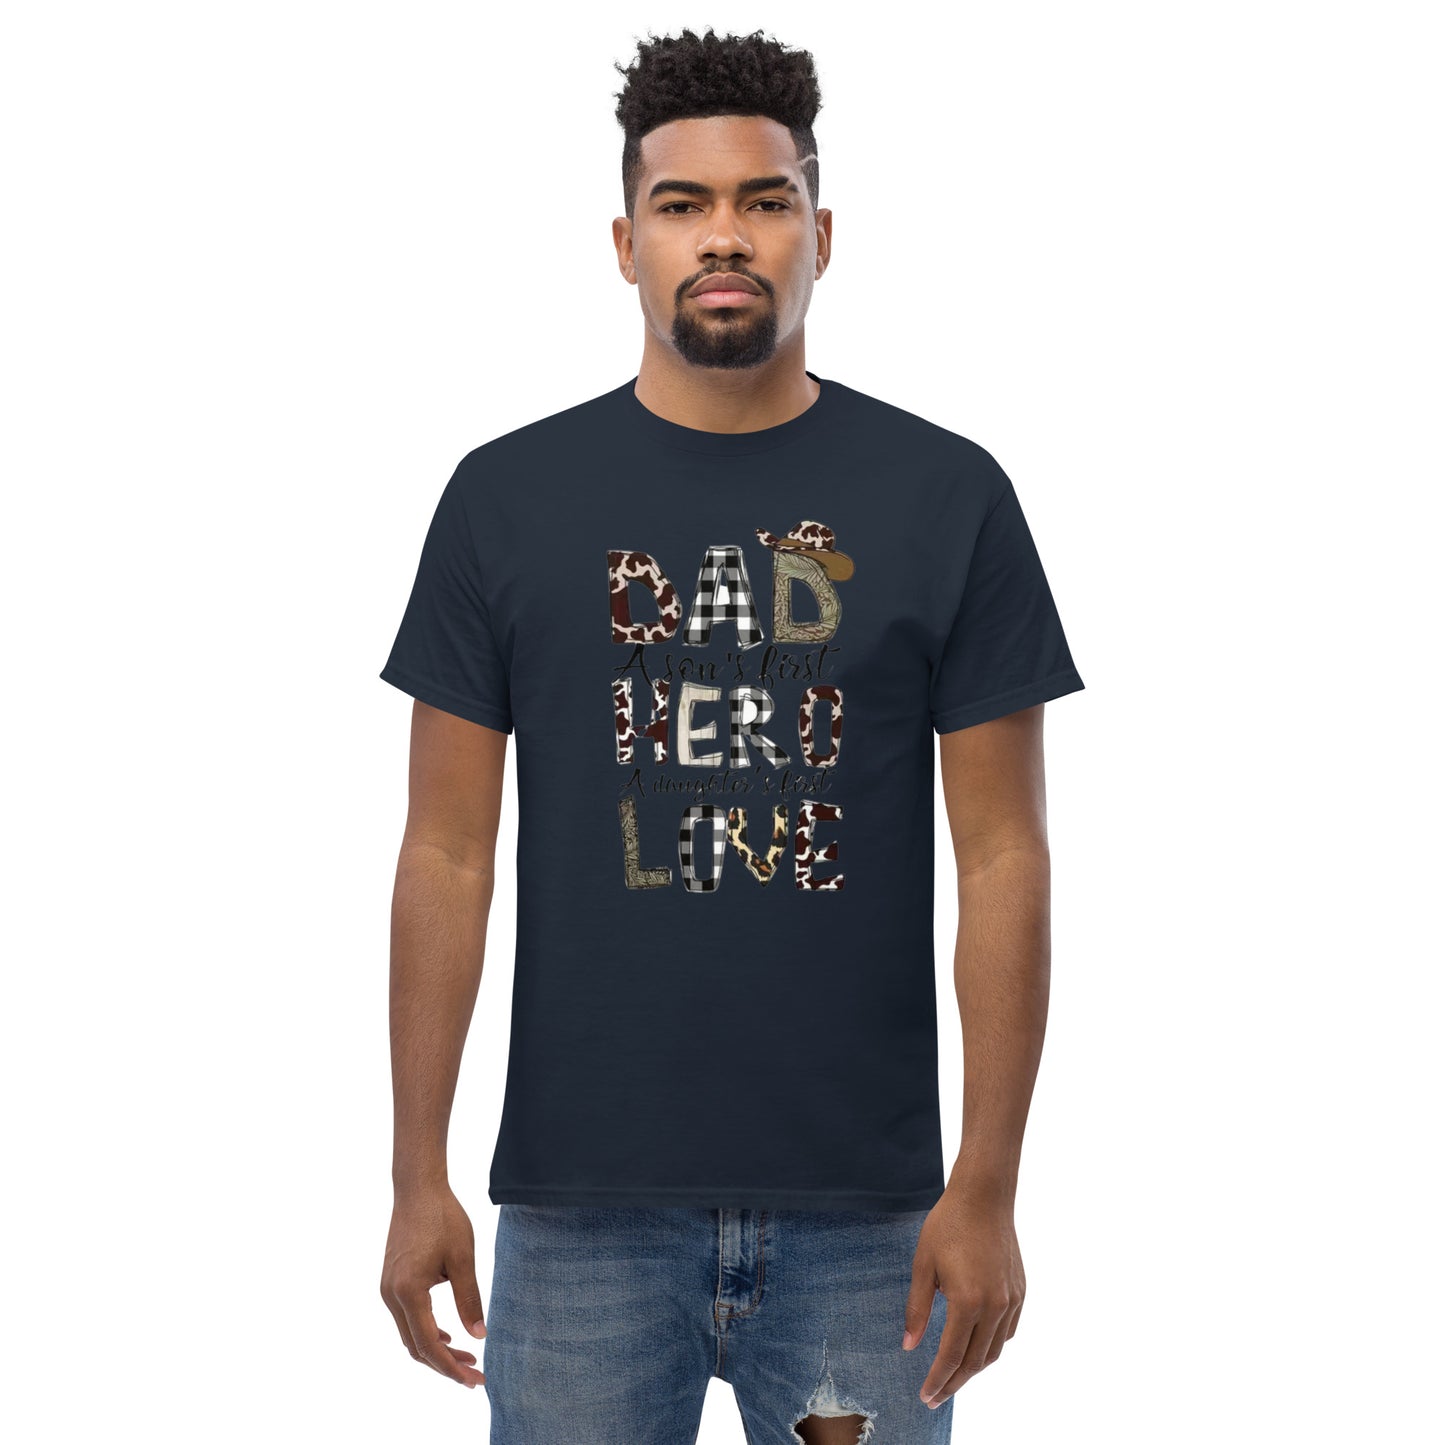 Men's T-Shirt:  Dad A Son's First Hero, A Daughter's First Love